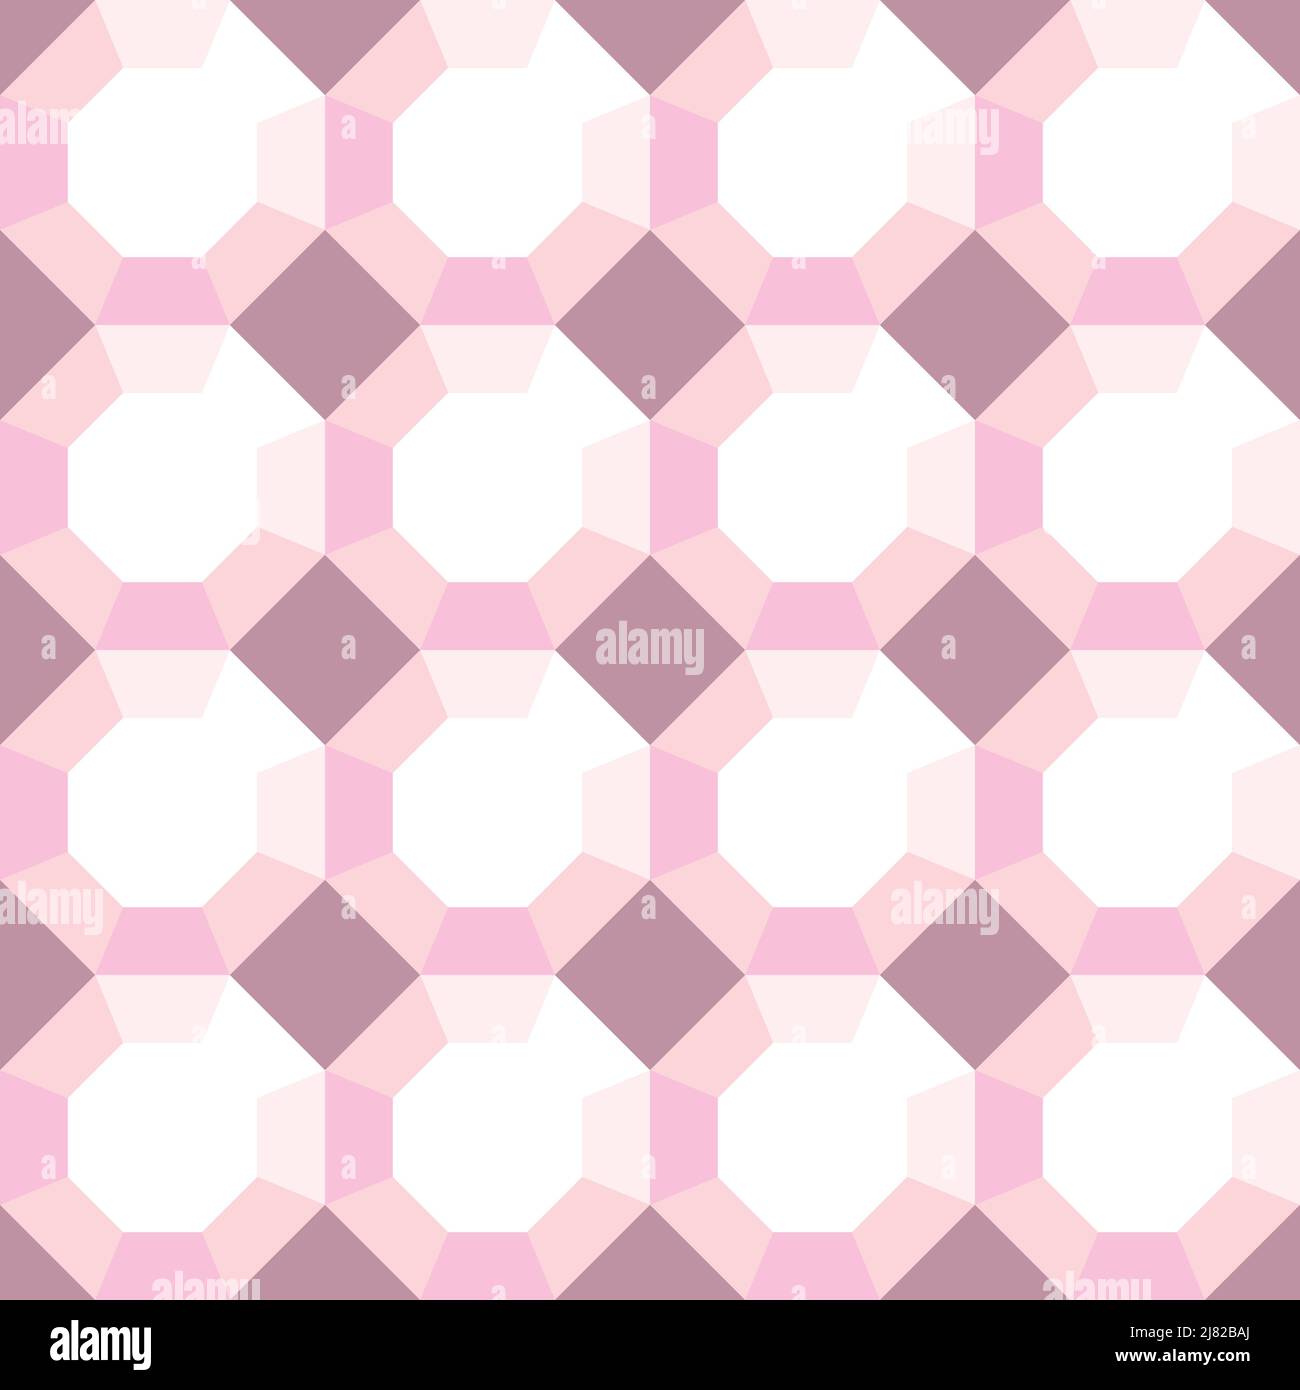 Repeat vector pattern with 3d diamond on pink background. Simple geometrical illusion wallpaper design. Decorative optical fashion textile. Stock Vector